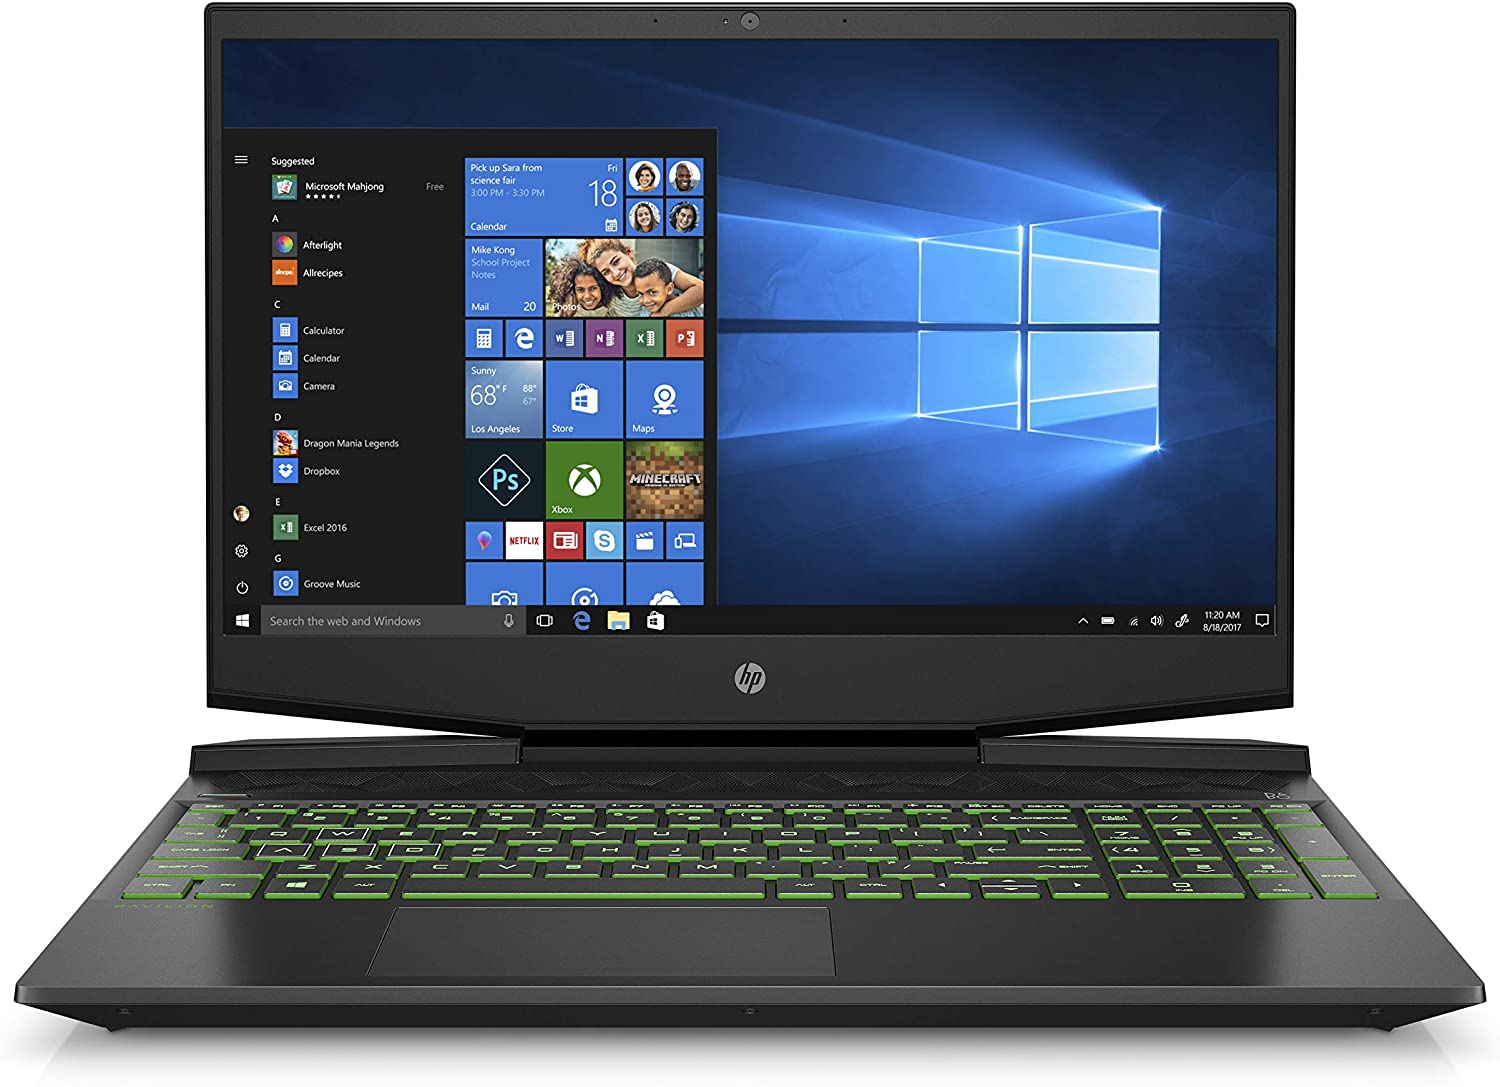 Front view of the HP Pavilion 15 gaming laptop. 